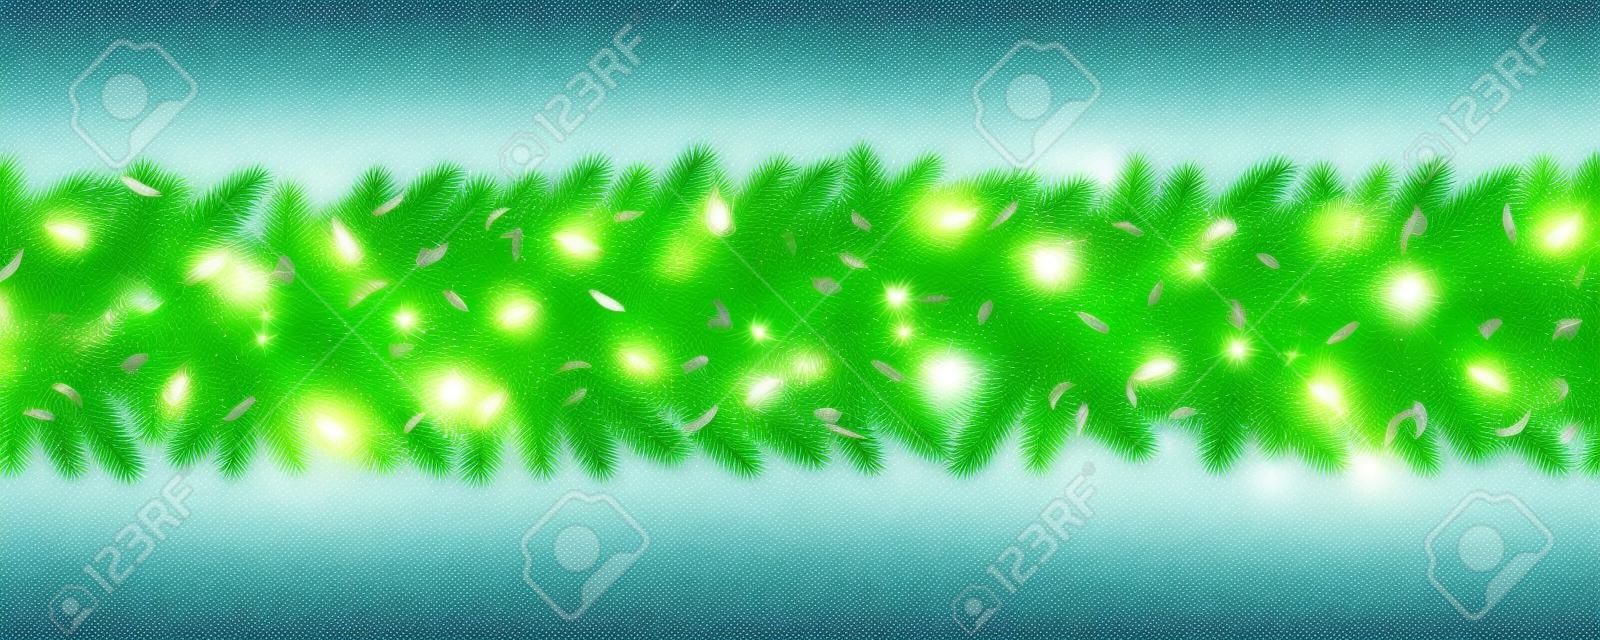 Christmas and New Year border of realistic branches of Christmas tree, garland light bulbs, serpentine Element for festive design isolated on transparent background Vector